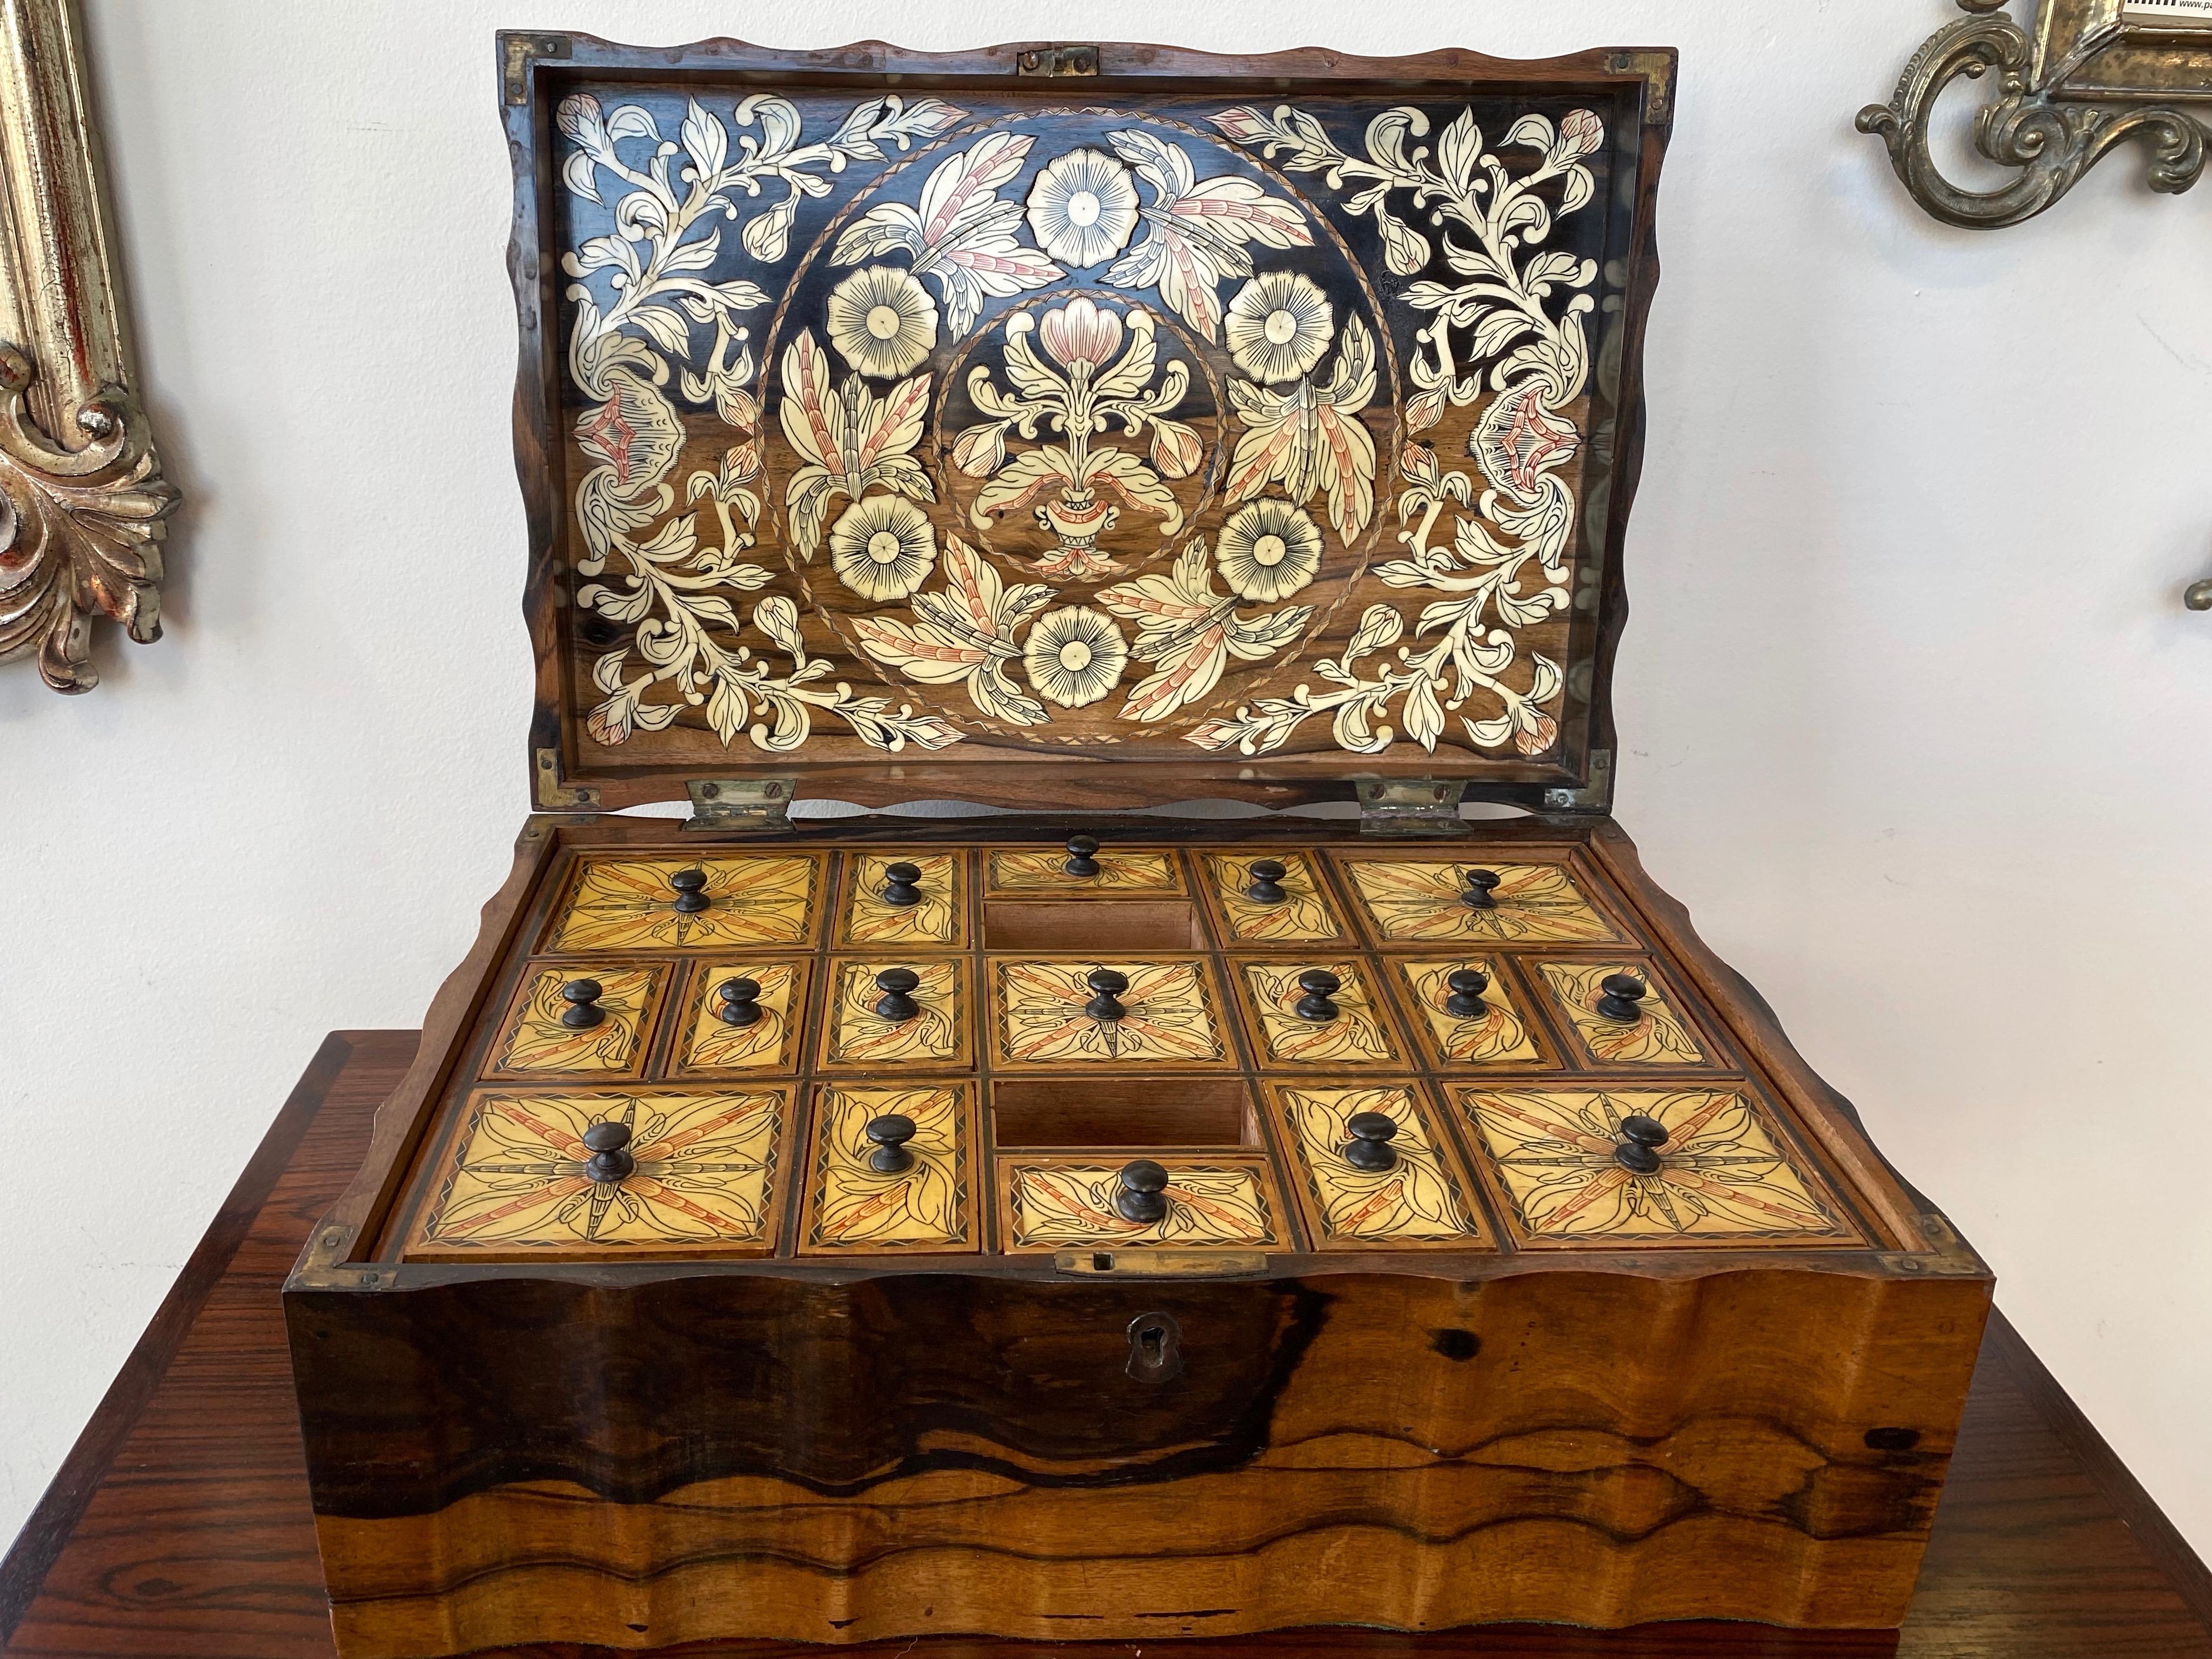 Inlay Anglo-Ceylonese Coromandel Work Box with Exceptional Decoration, Late 19th C.